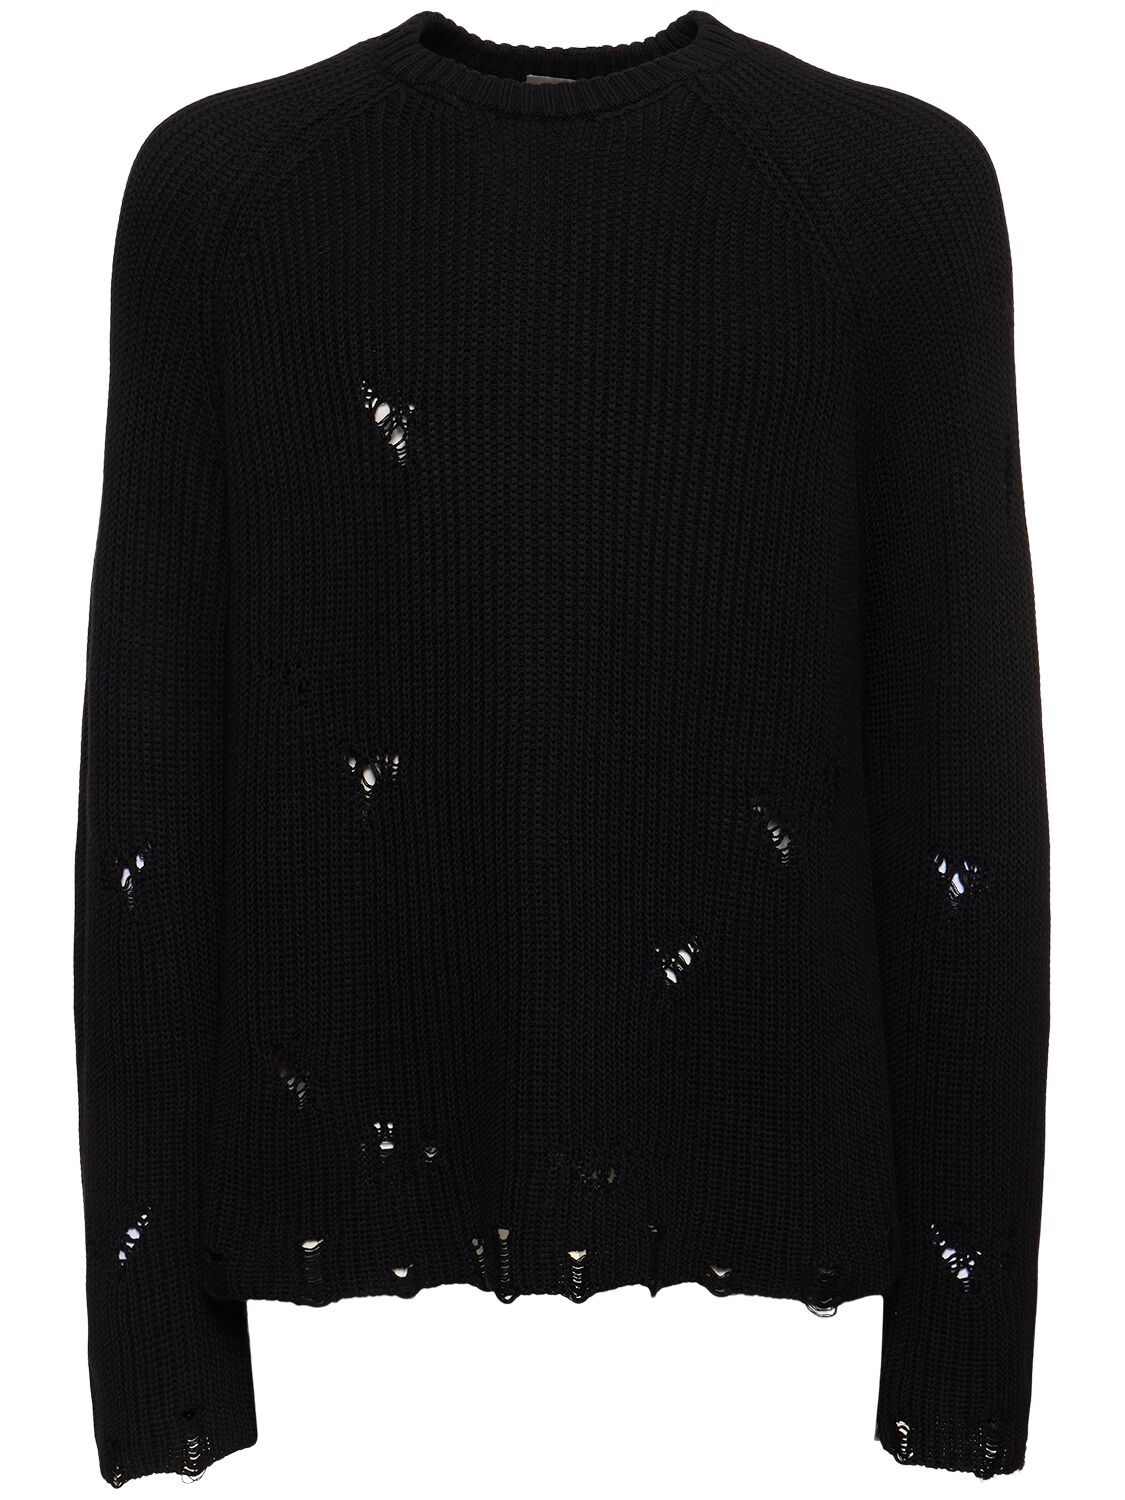 Image of Unisex Knitted Sweater W/ Holes